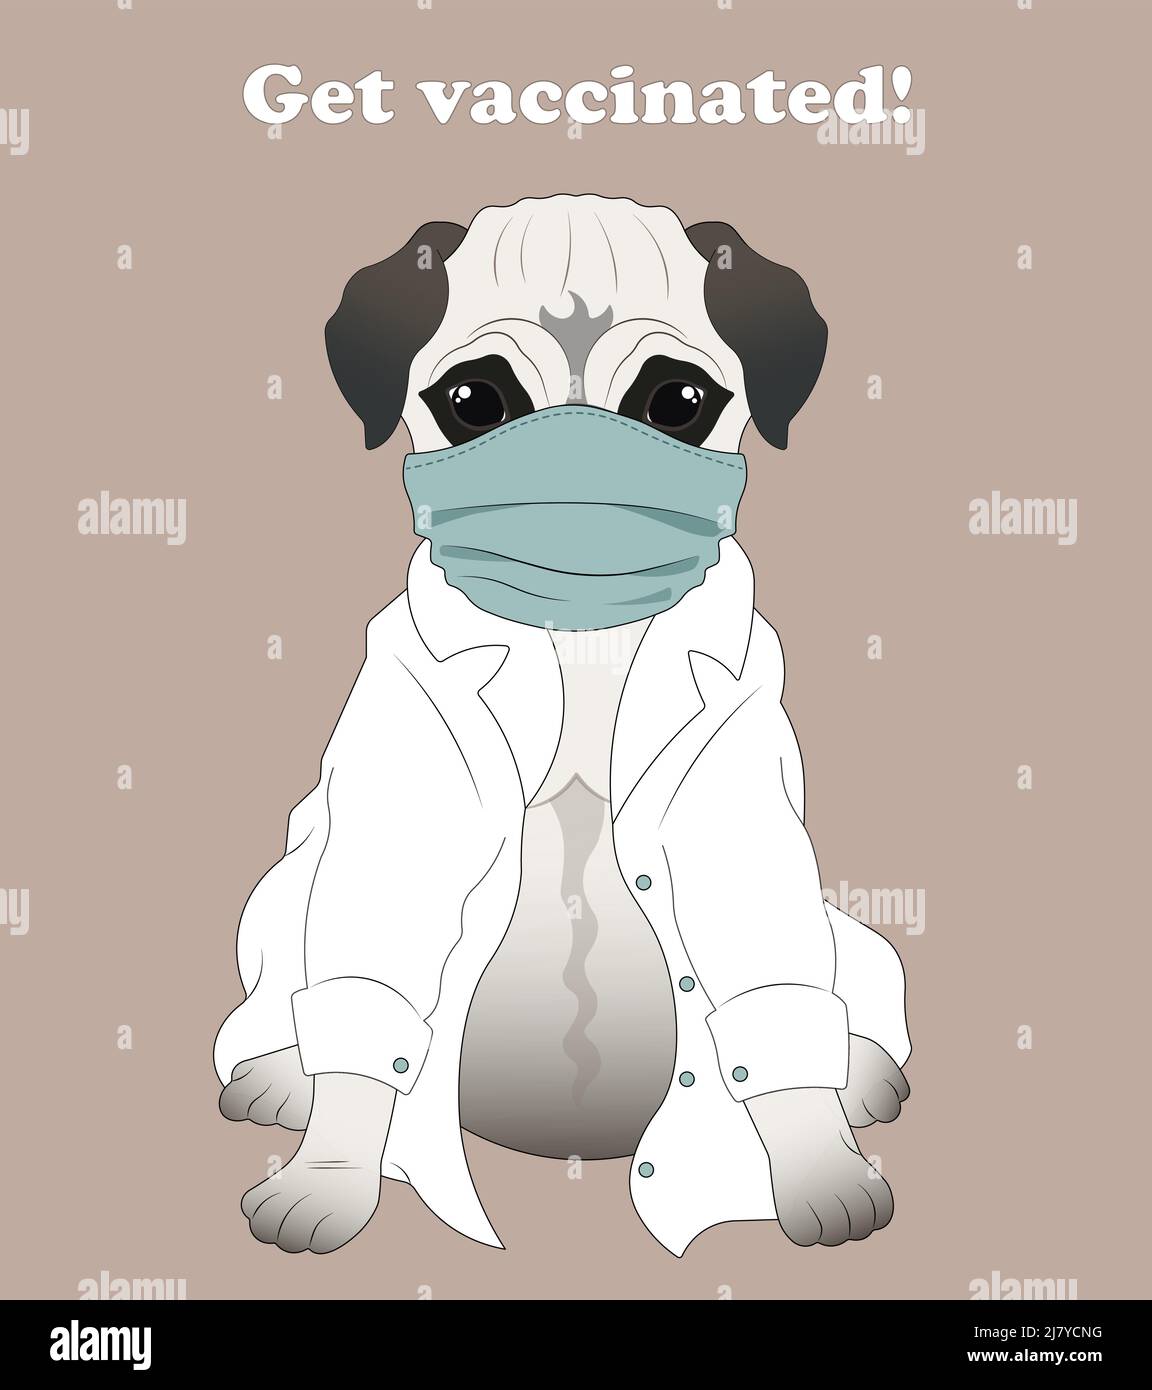 Pug in a medical coat and mask. Get vaccinated. Stock Vector